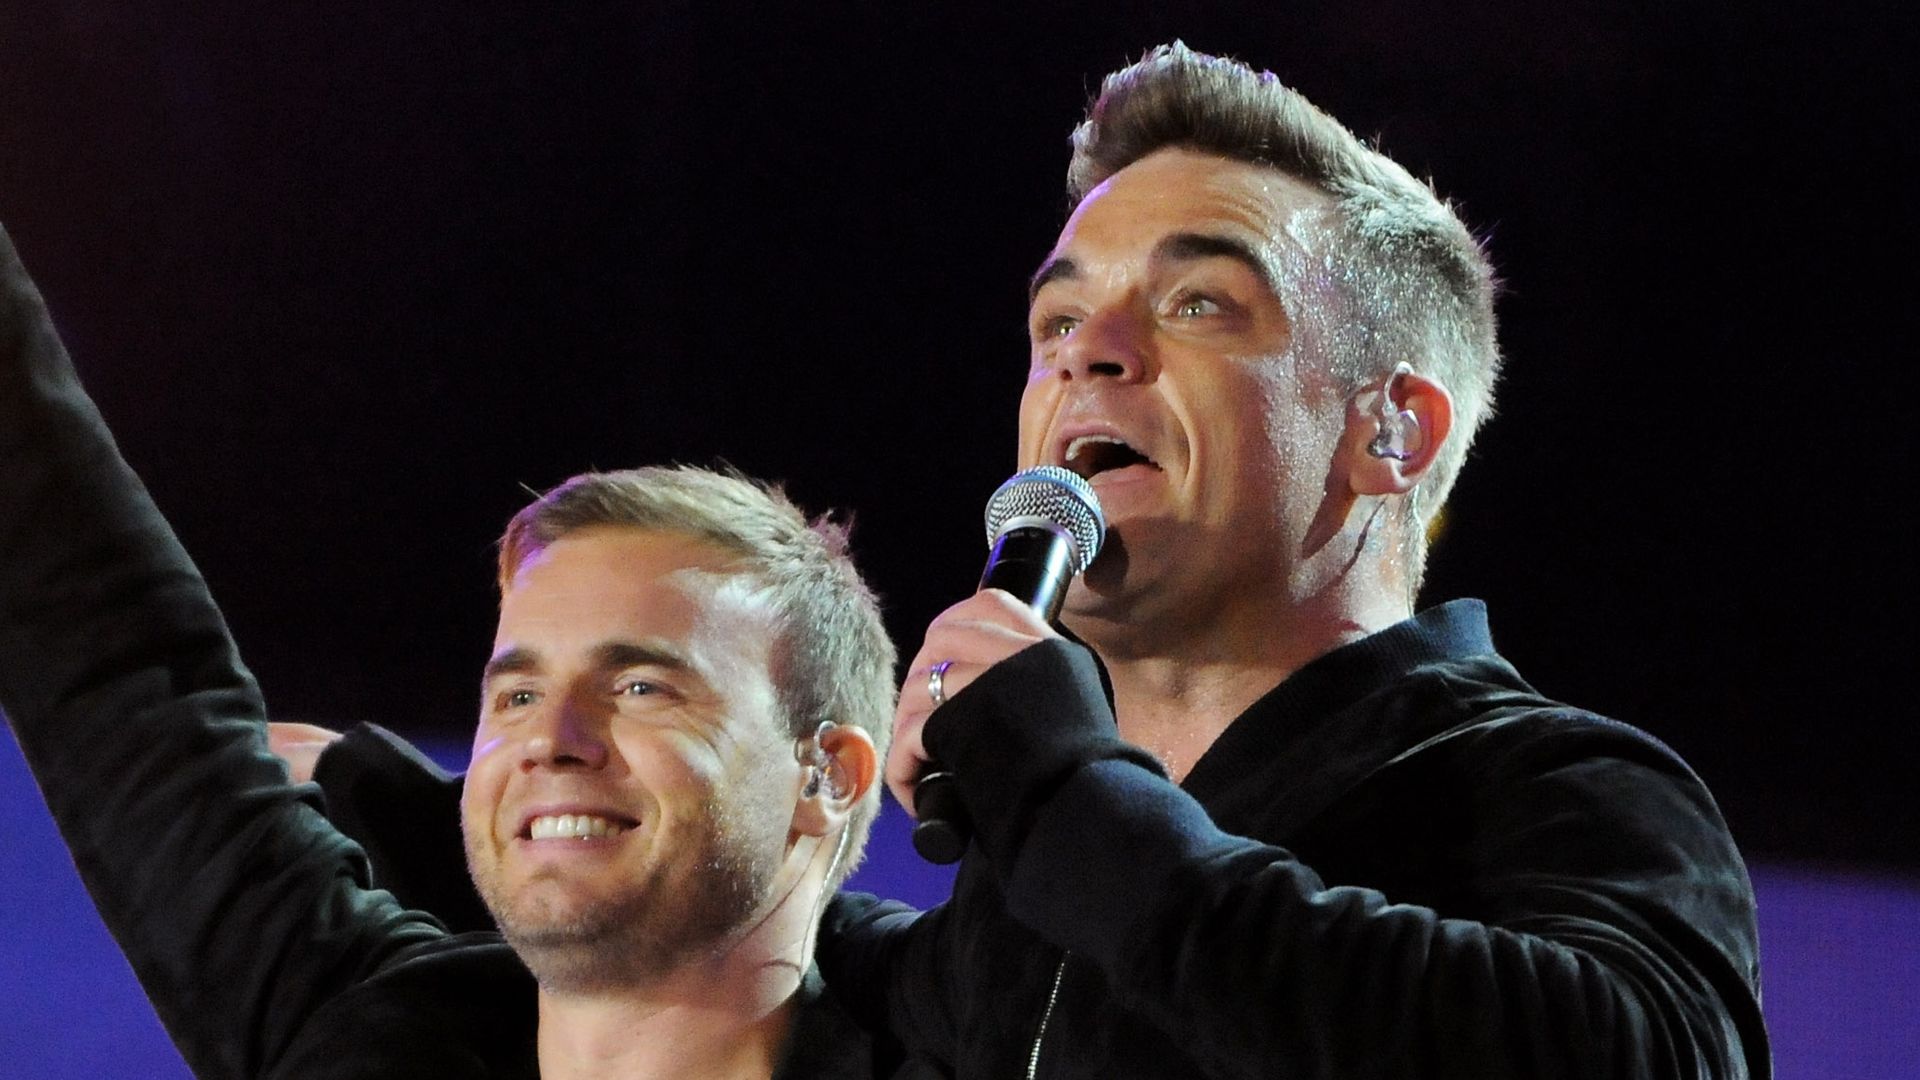 Robbie Williams and Gary Barlow on stage 